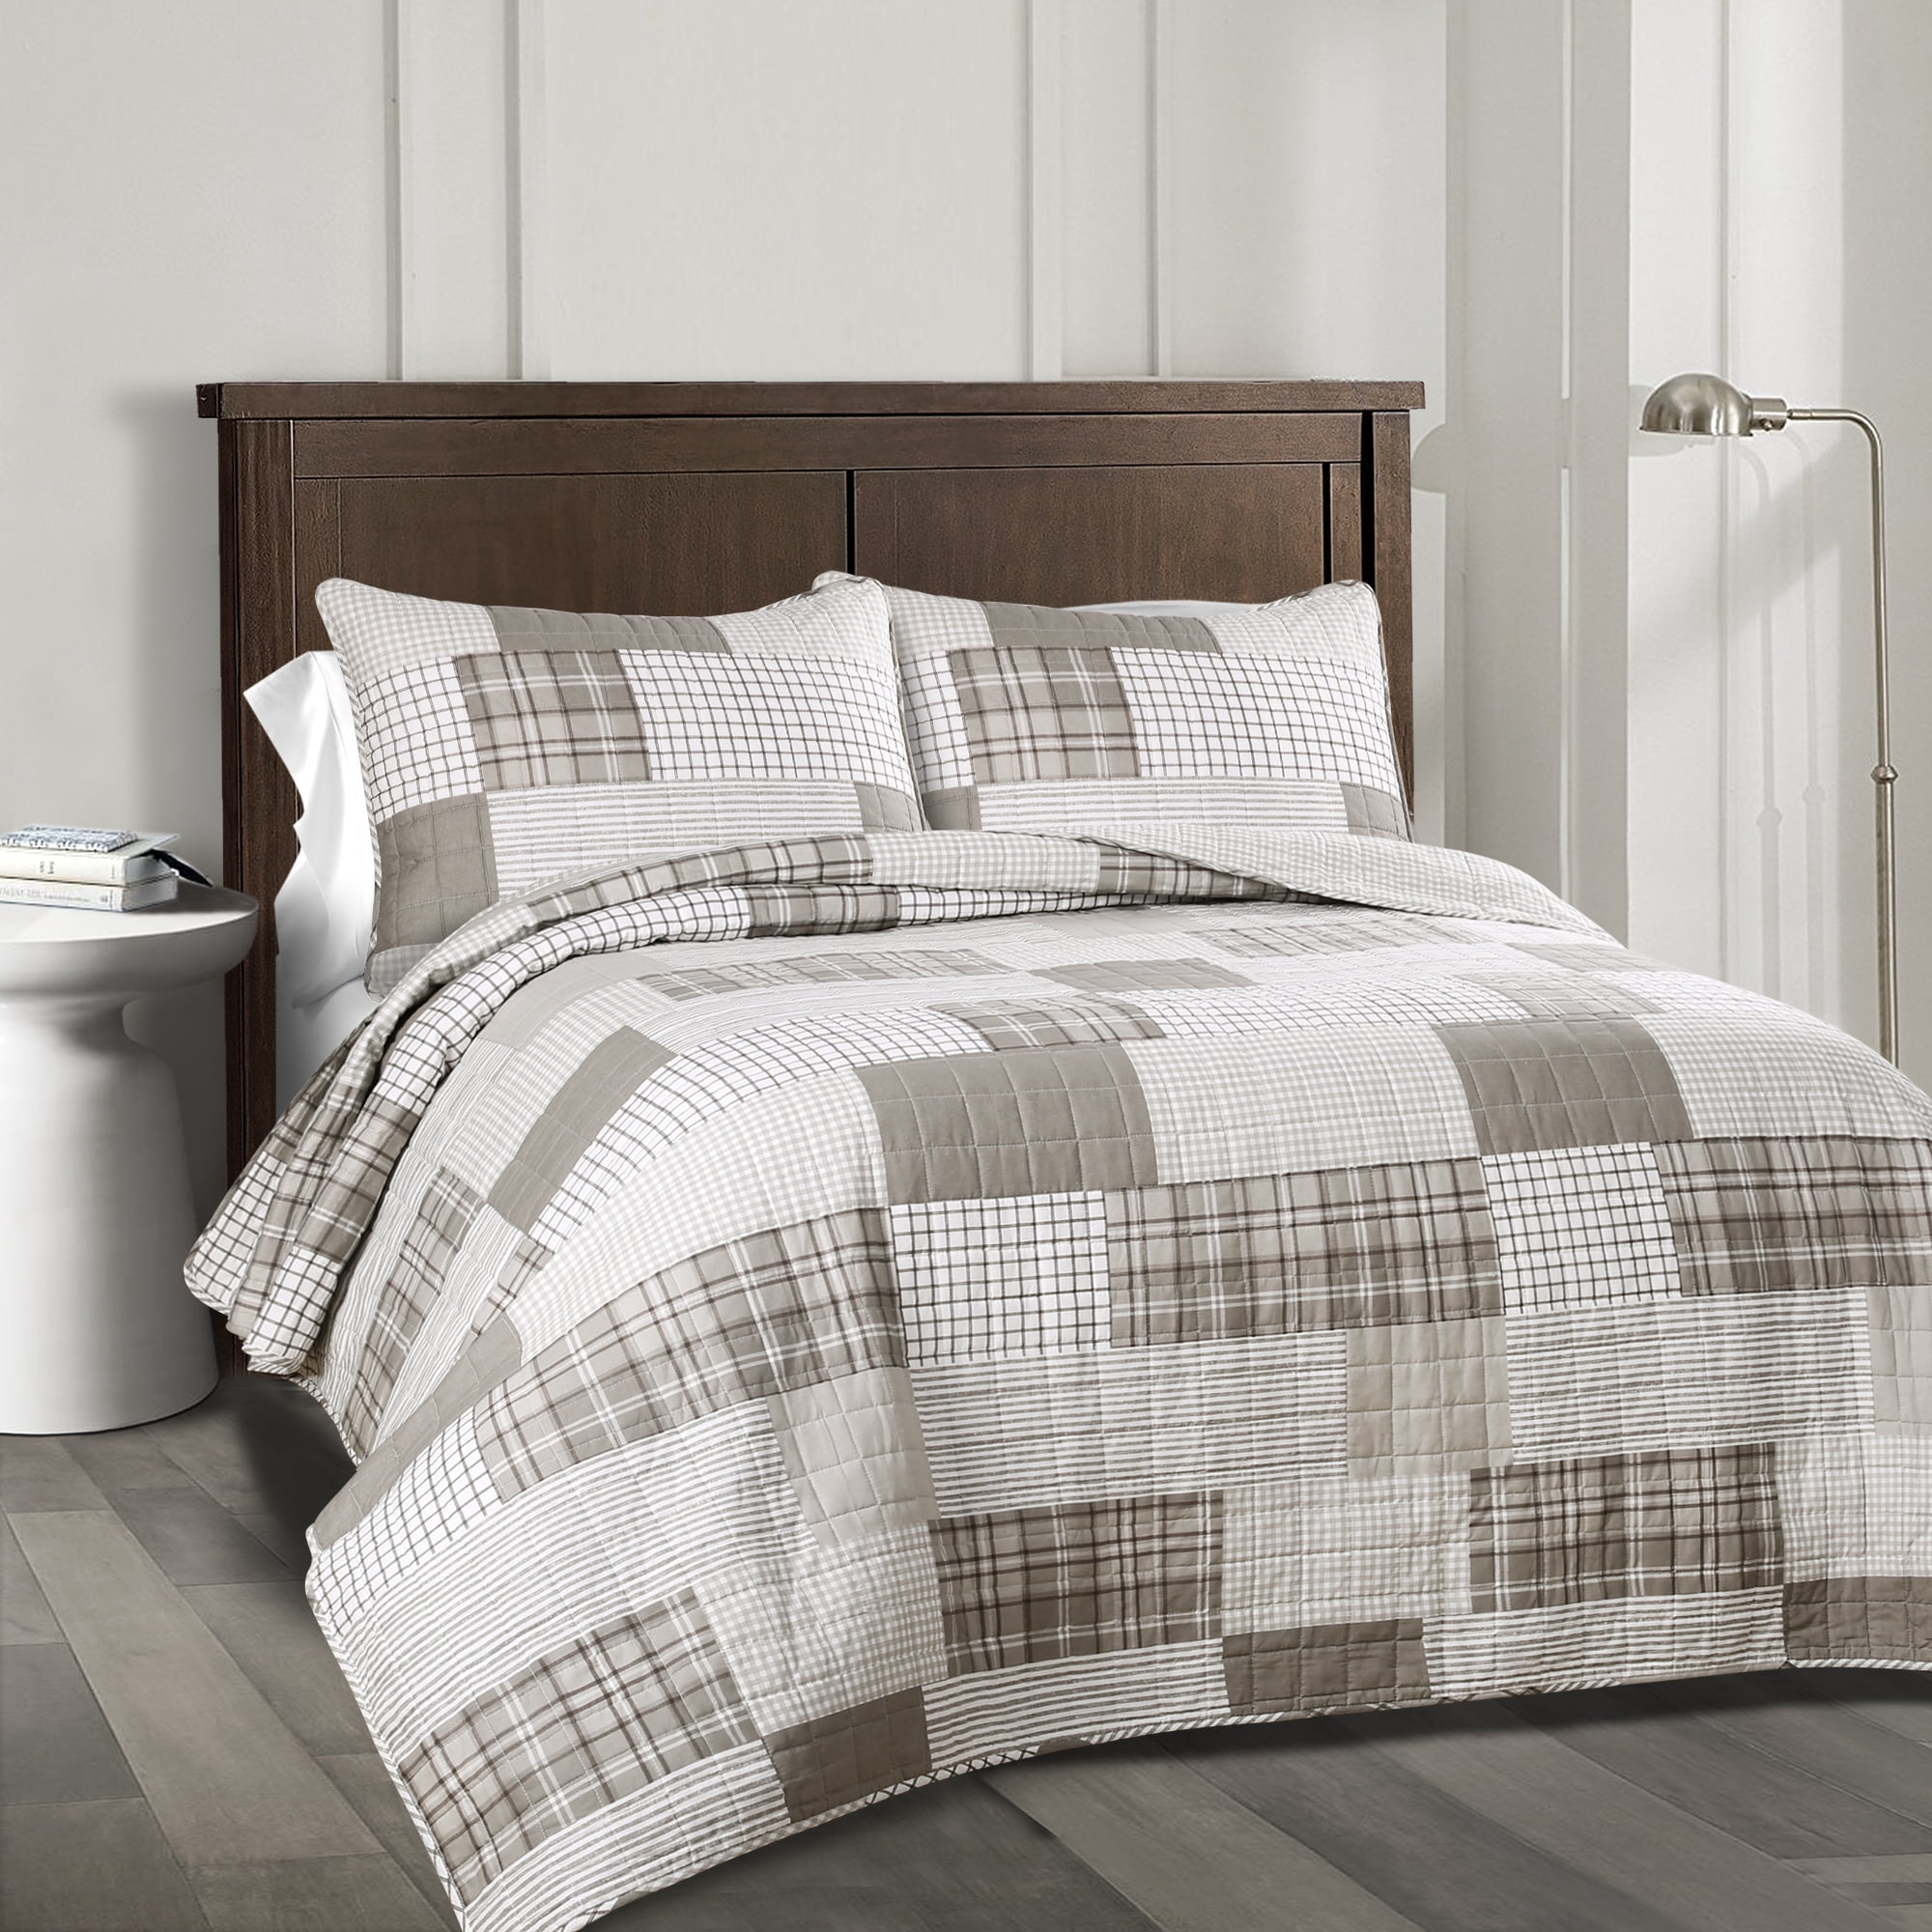 Lush Decor Greenville Cotton Reversible Quilt, Full/Queen, Taupe, 3-Pc ...